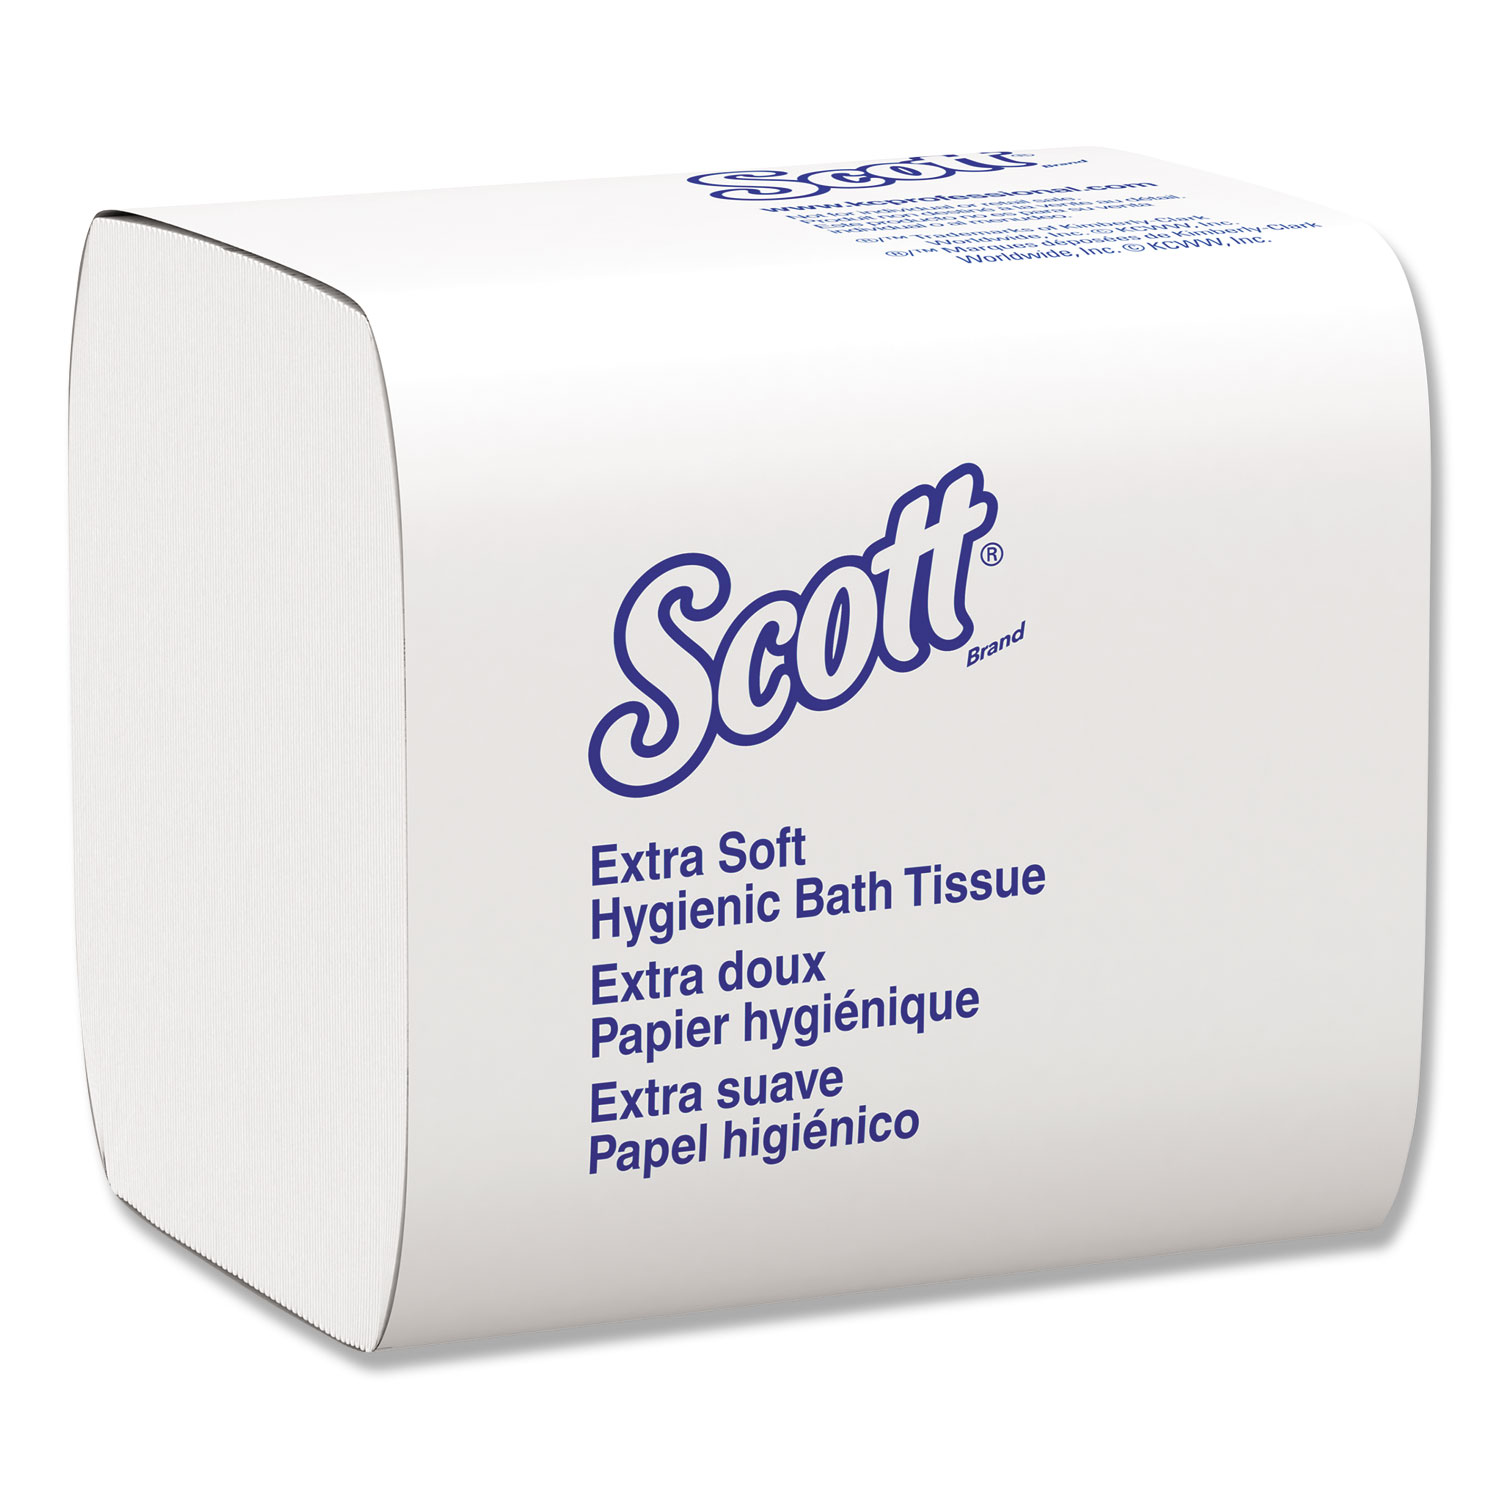 Scott® Control™ Extra Soft Hygienic Folded Toilet Paper - 2 Ply, 250 Count, 36/Case